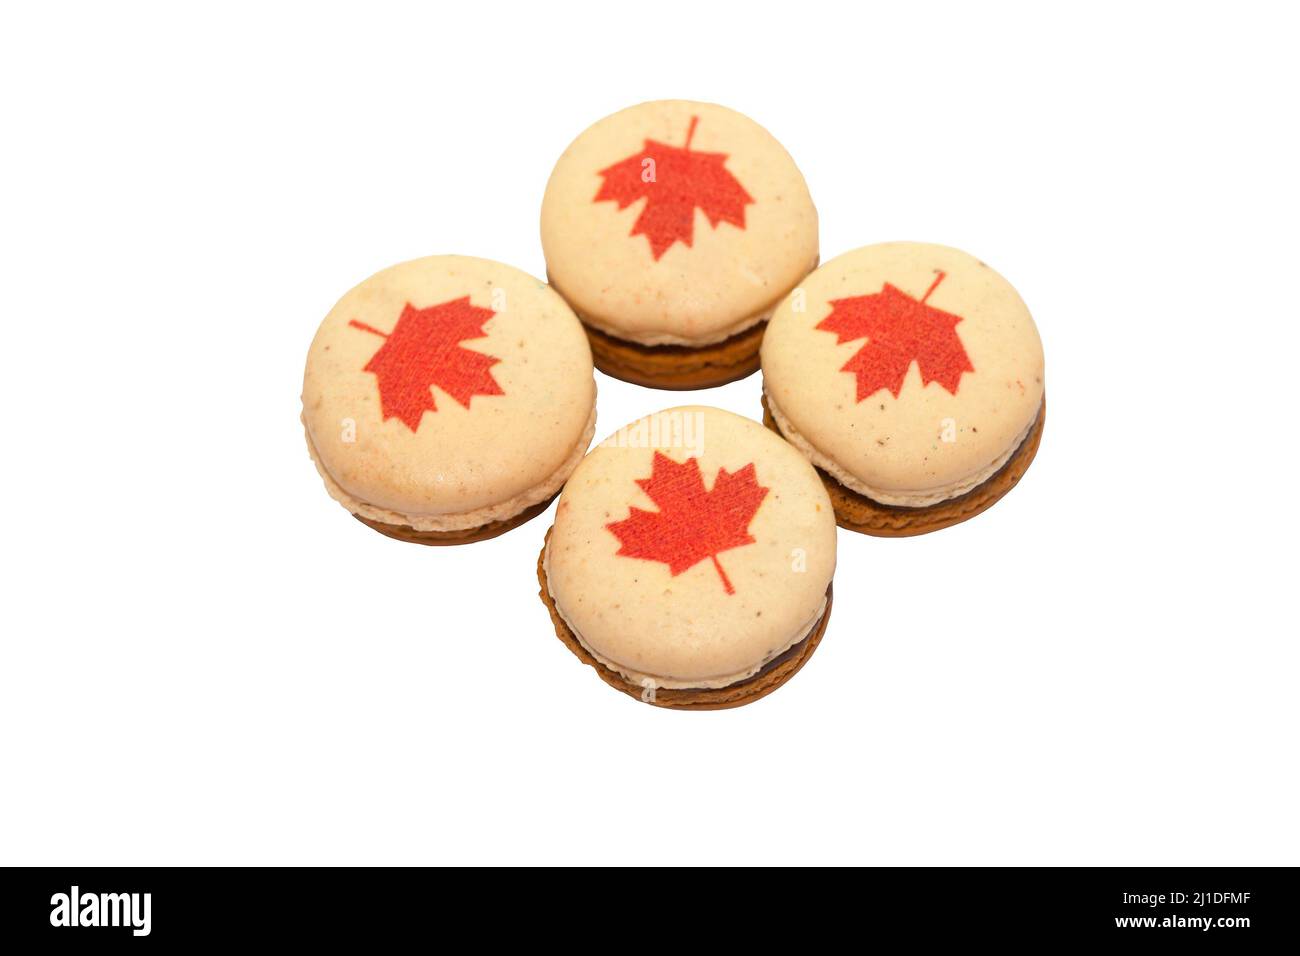 Macarons decorated with red maple leaves for Canada Day, on a white background Stock Photo